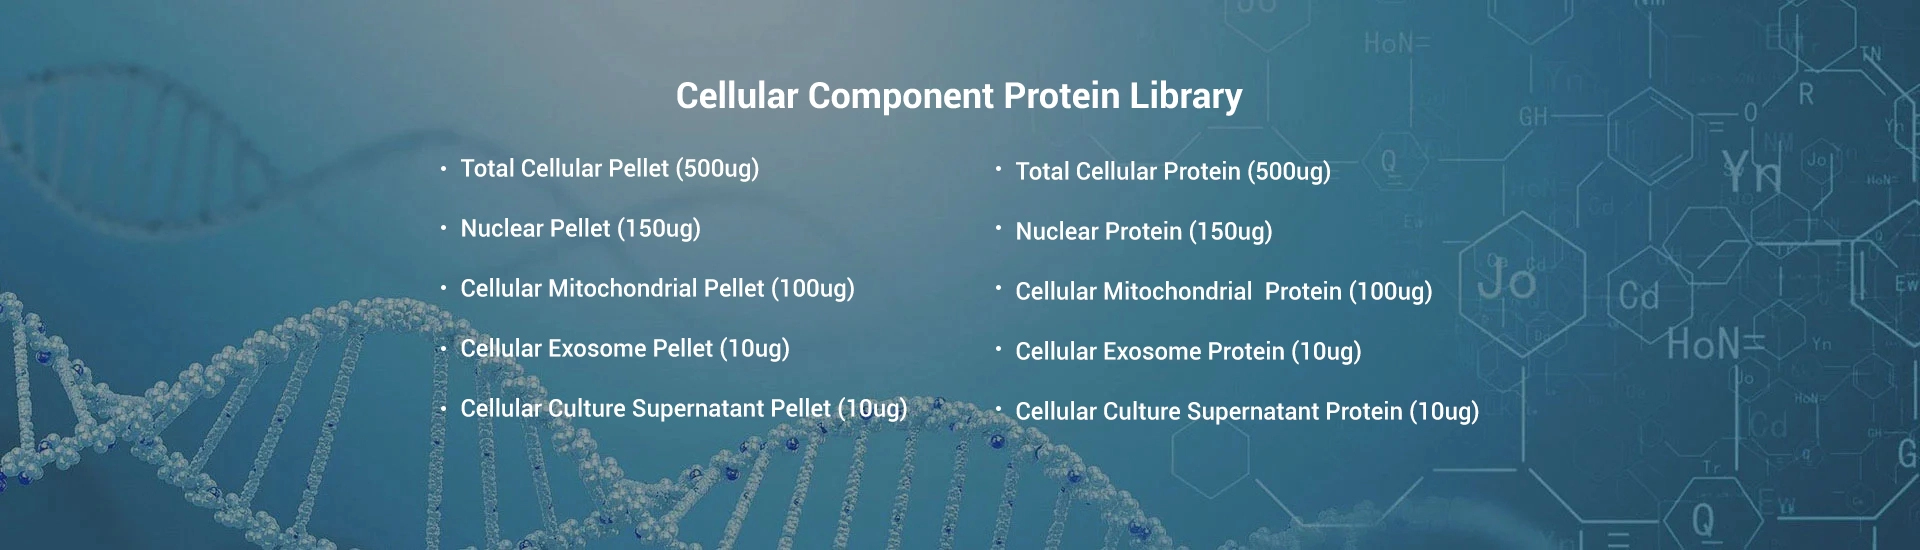 Cellular component protein library